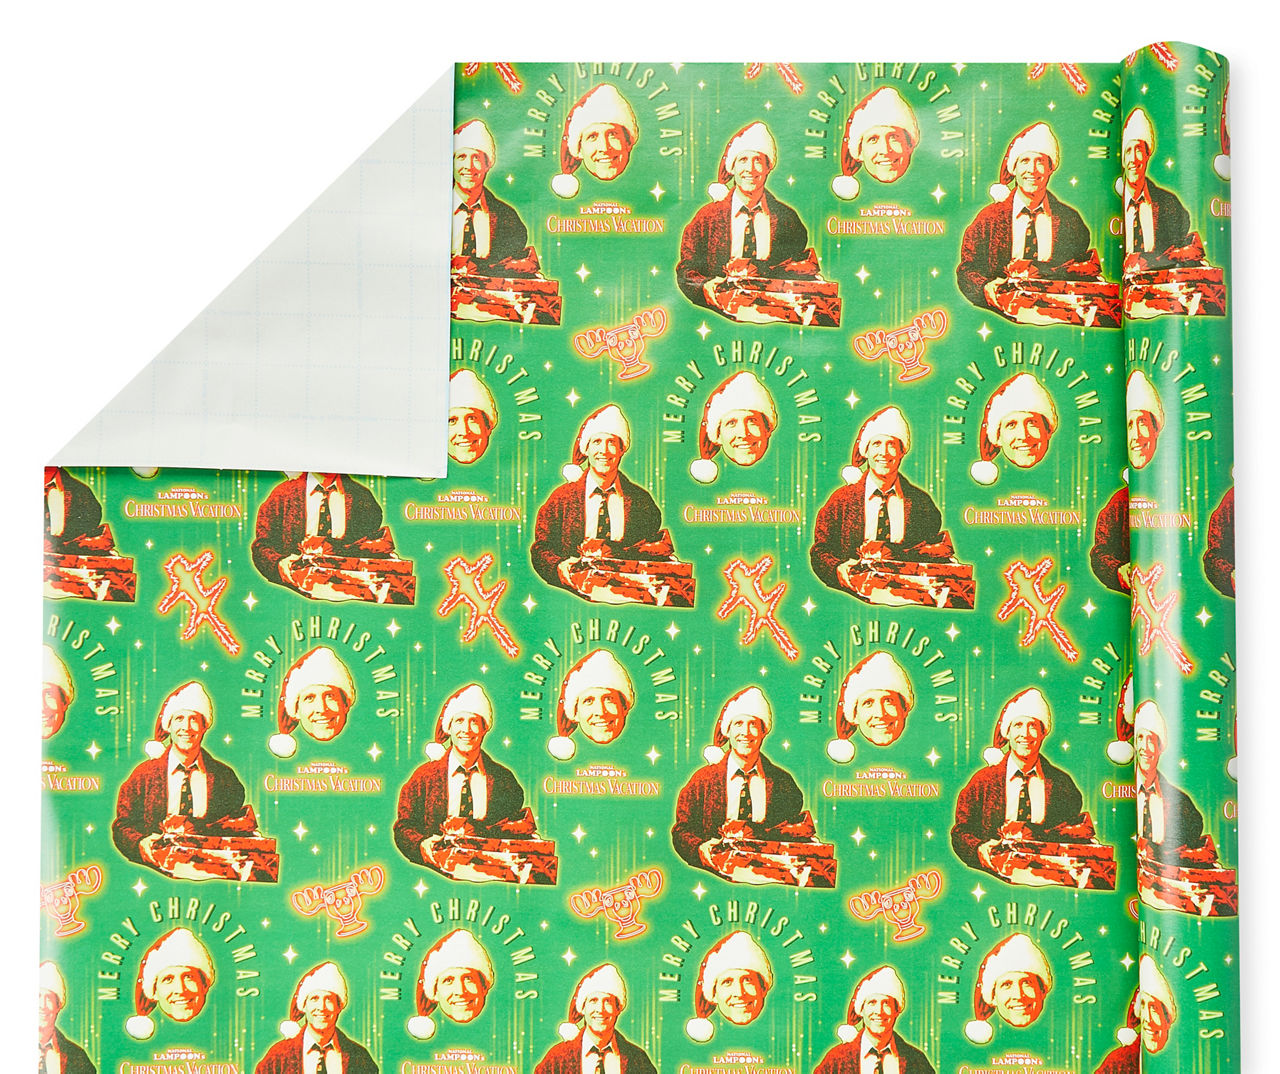 THE SANTA CLAUSE Large Wrapping Paper Original Movie Prop (0152